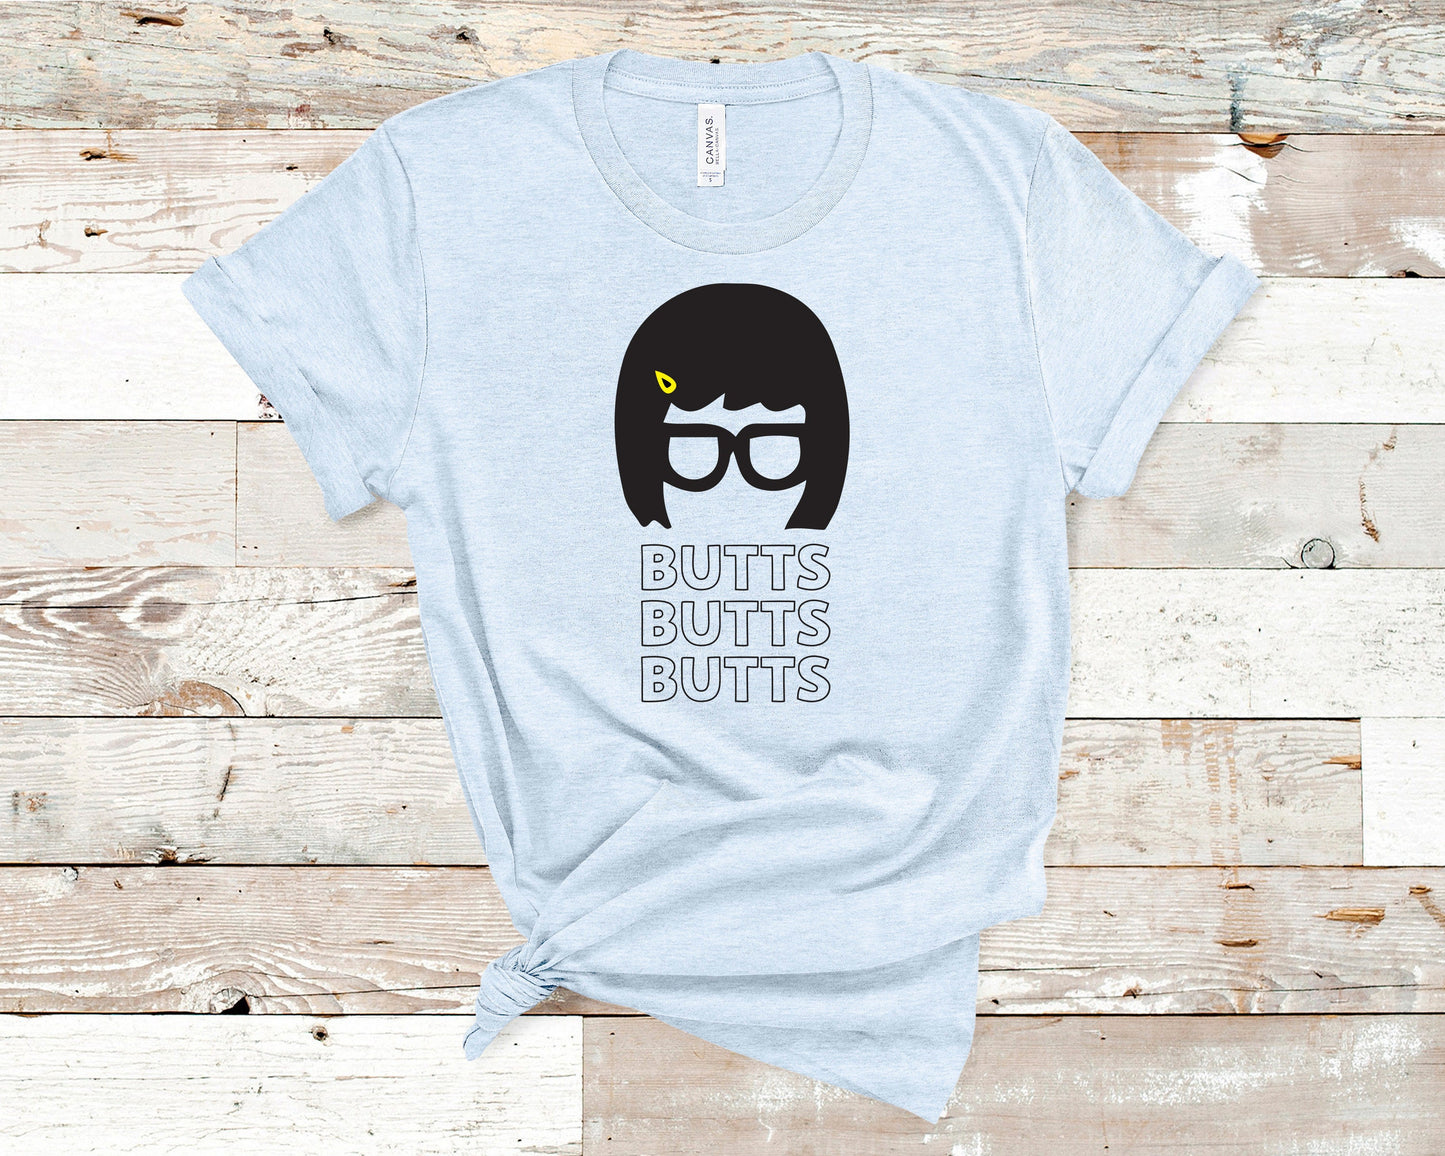 Tina Belcher - Bobs Burgers Fan - BUTTS BUTTS BUTTS- Unisex Adults - Funny Gift